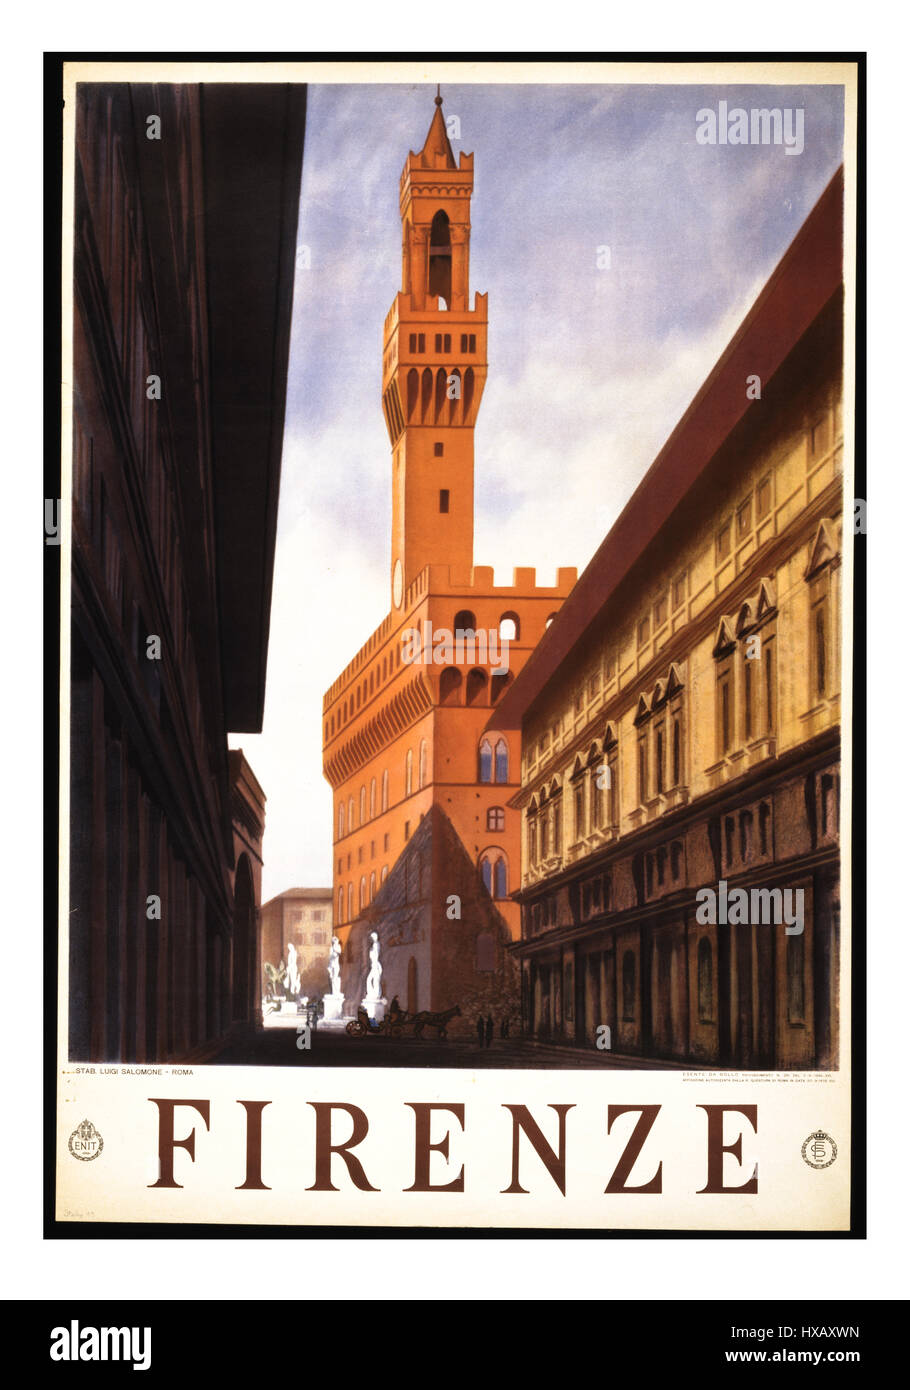 Vintage retro travel poster for Firenze Florence featuring Palazzo Vecchio, the town hall of Florence Tuscany Italy Stock Photo